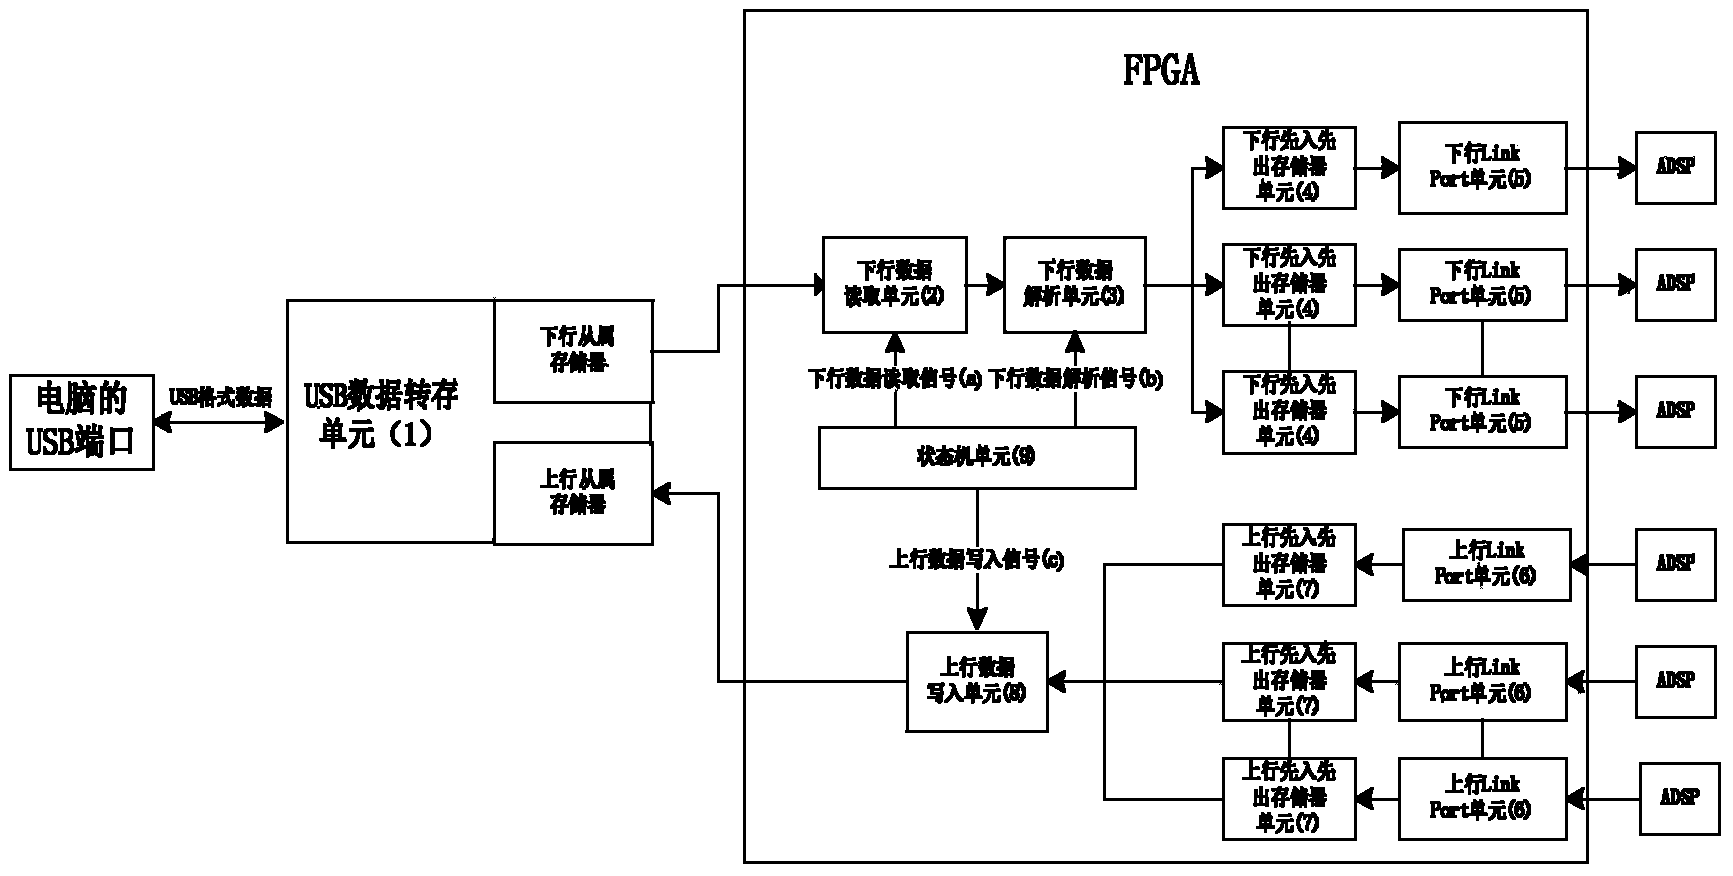 FPGA-based (field programmable gate array-based) USB (universal serial bus) to multilink interface circuit